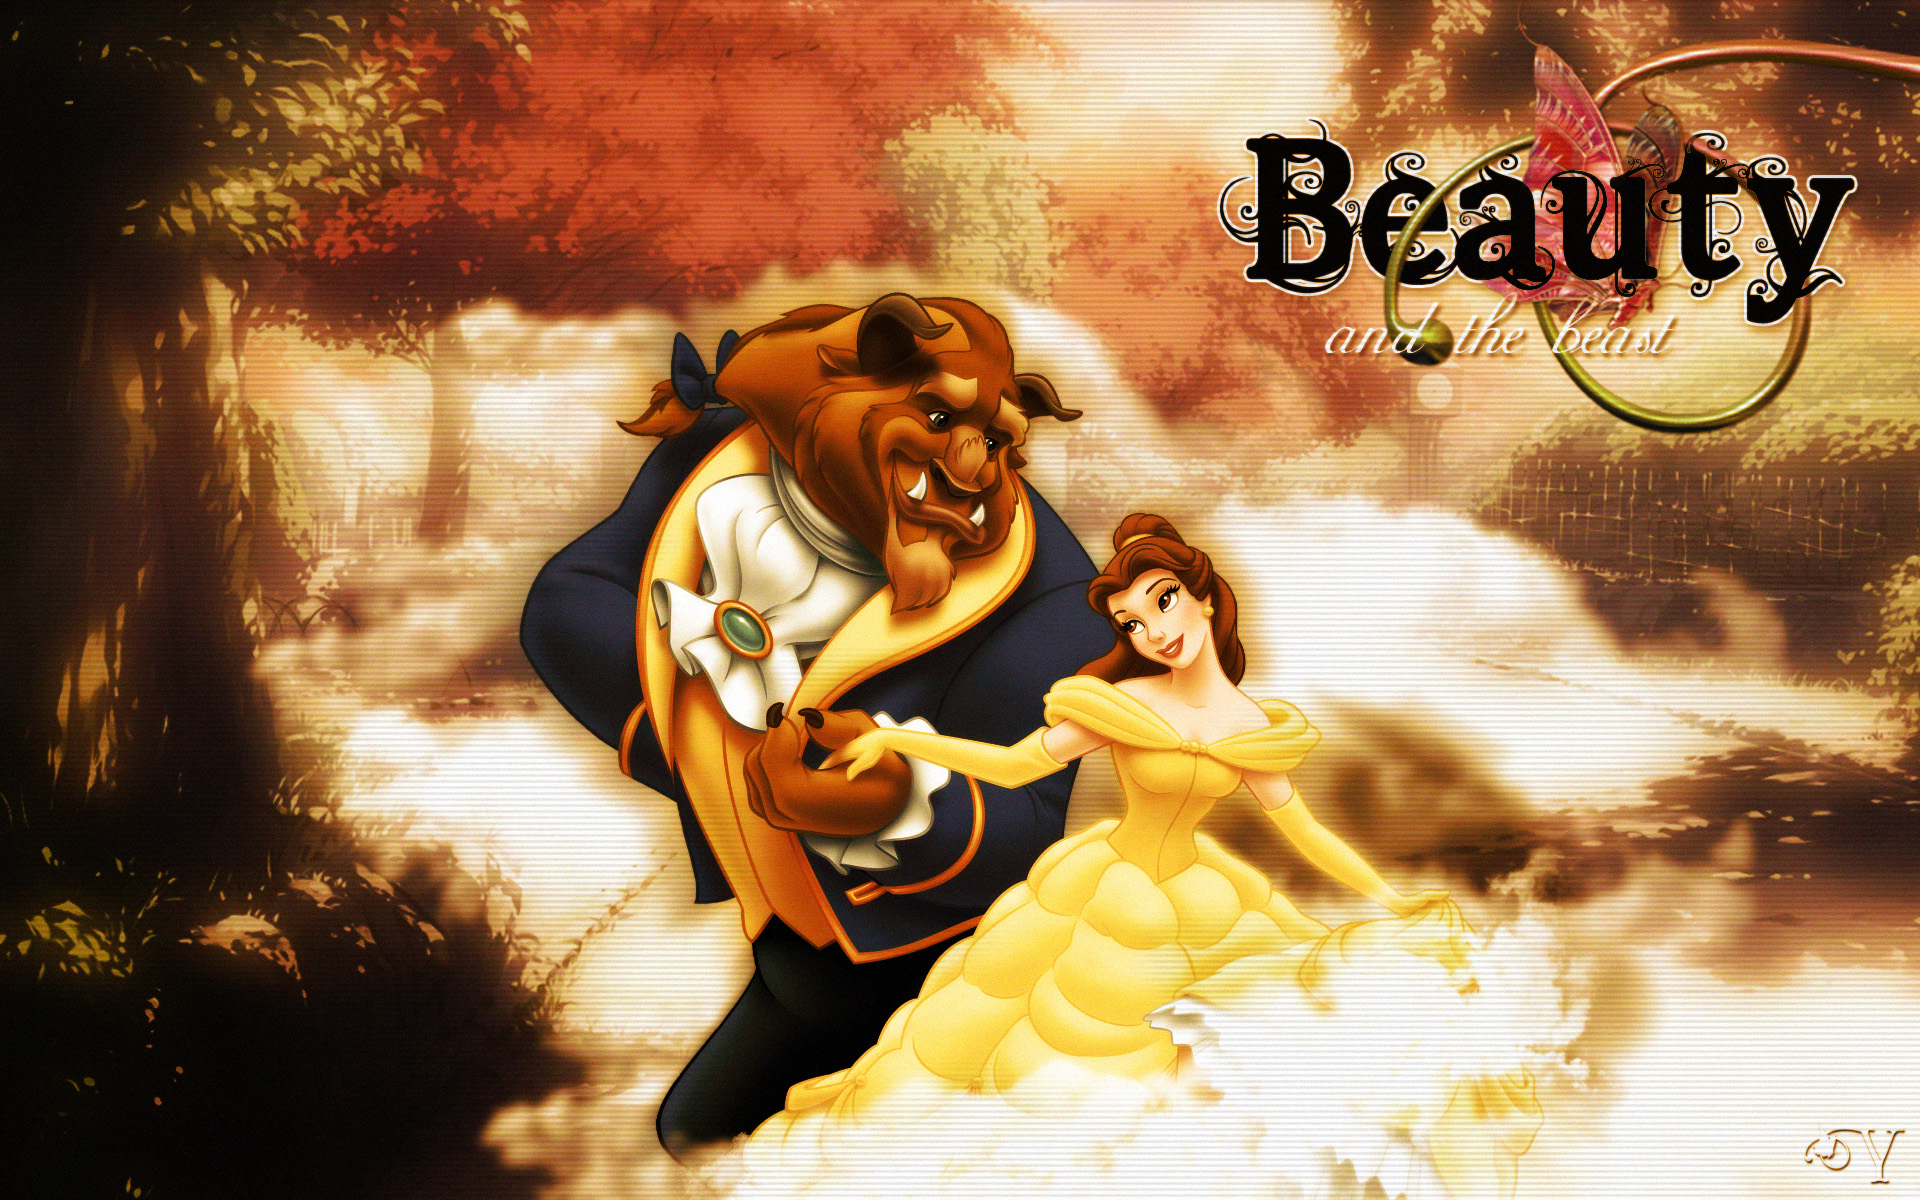 Beauty and the Beast Images. 